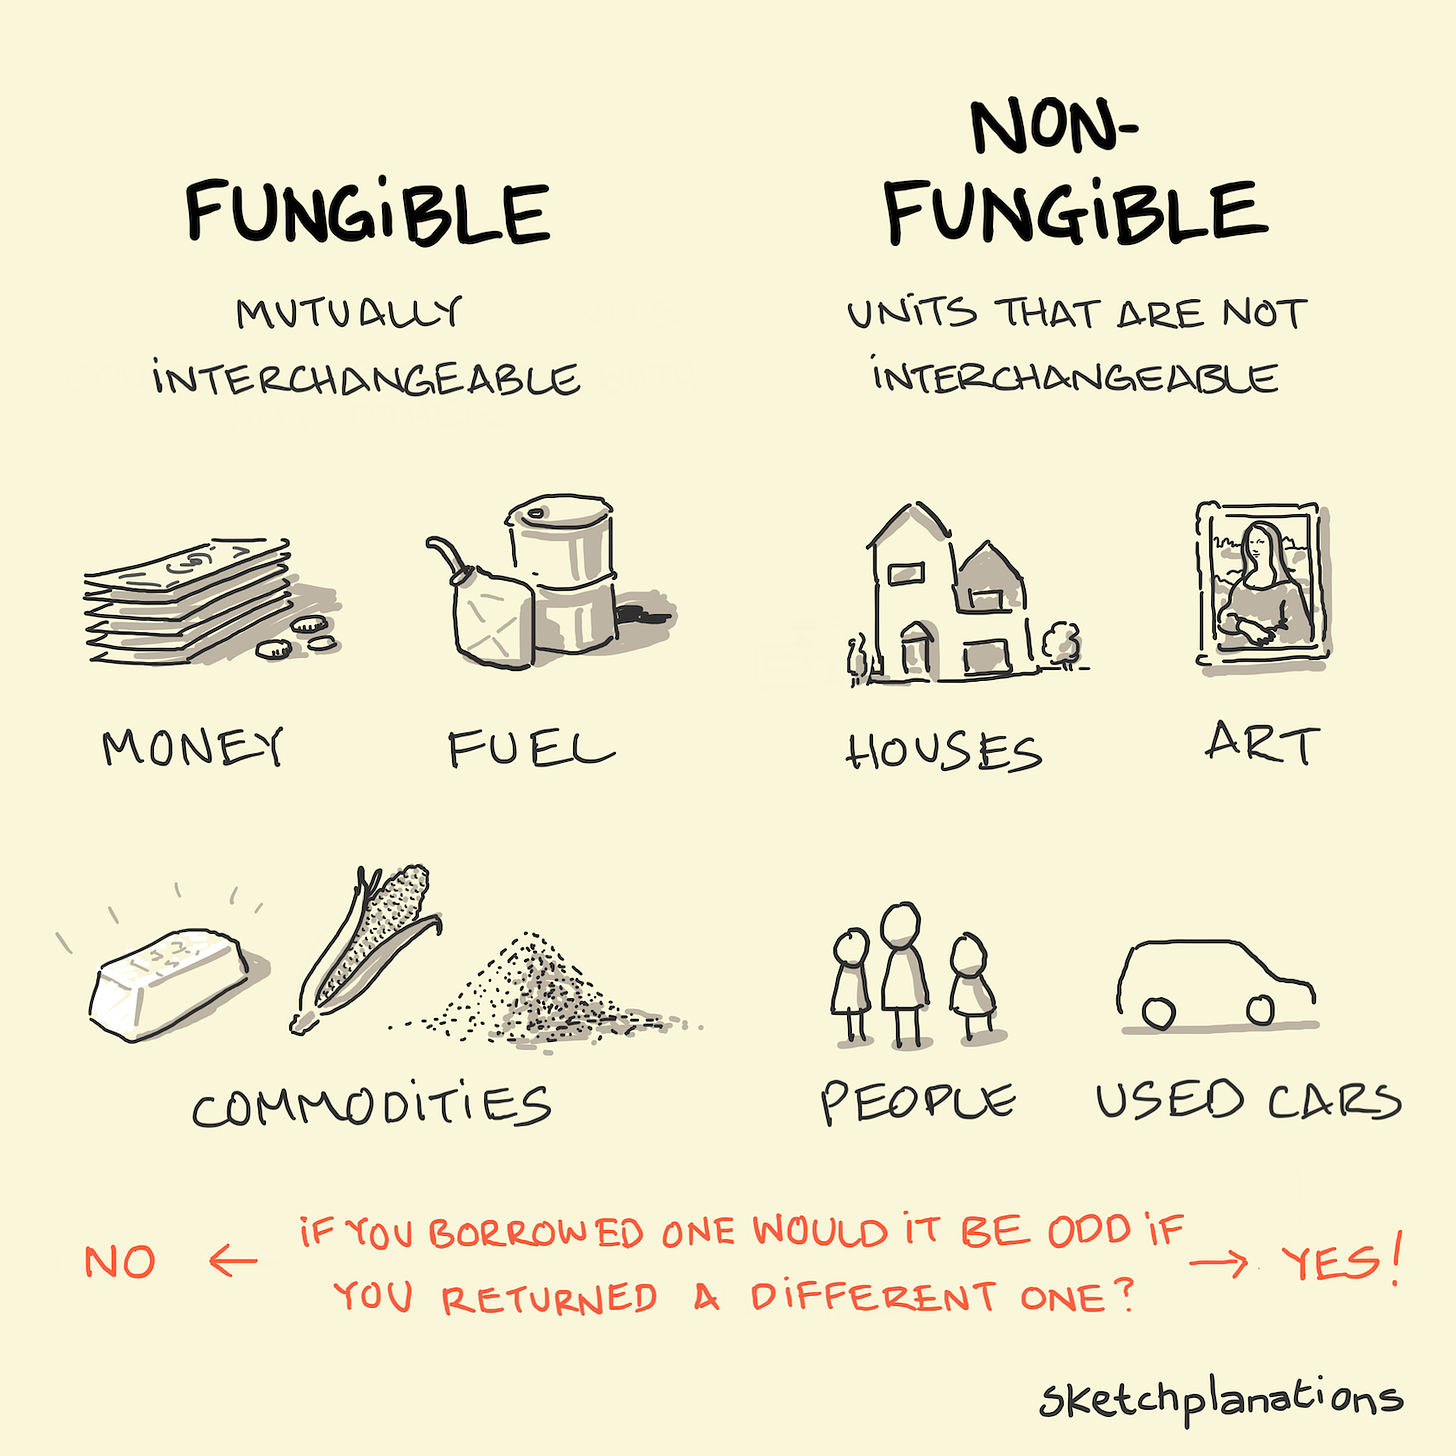 Examples of fungible goods on the left: money, fuel, and commodities and Non-fungible goods on the right: houses, art, people, used cars